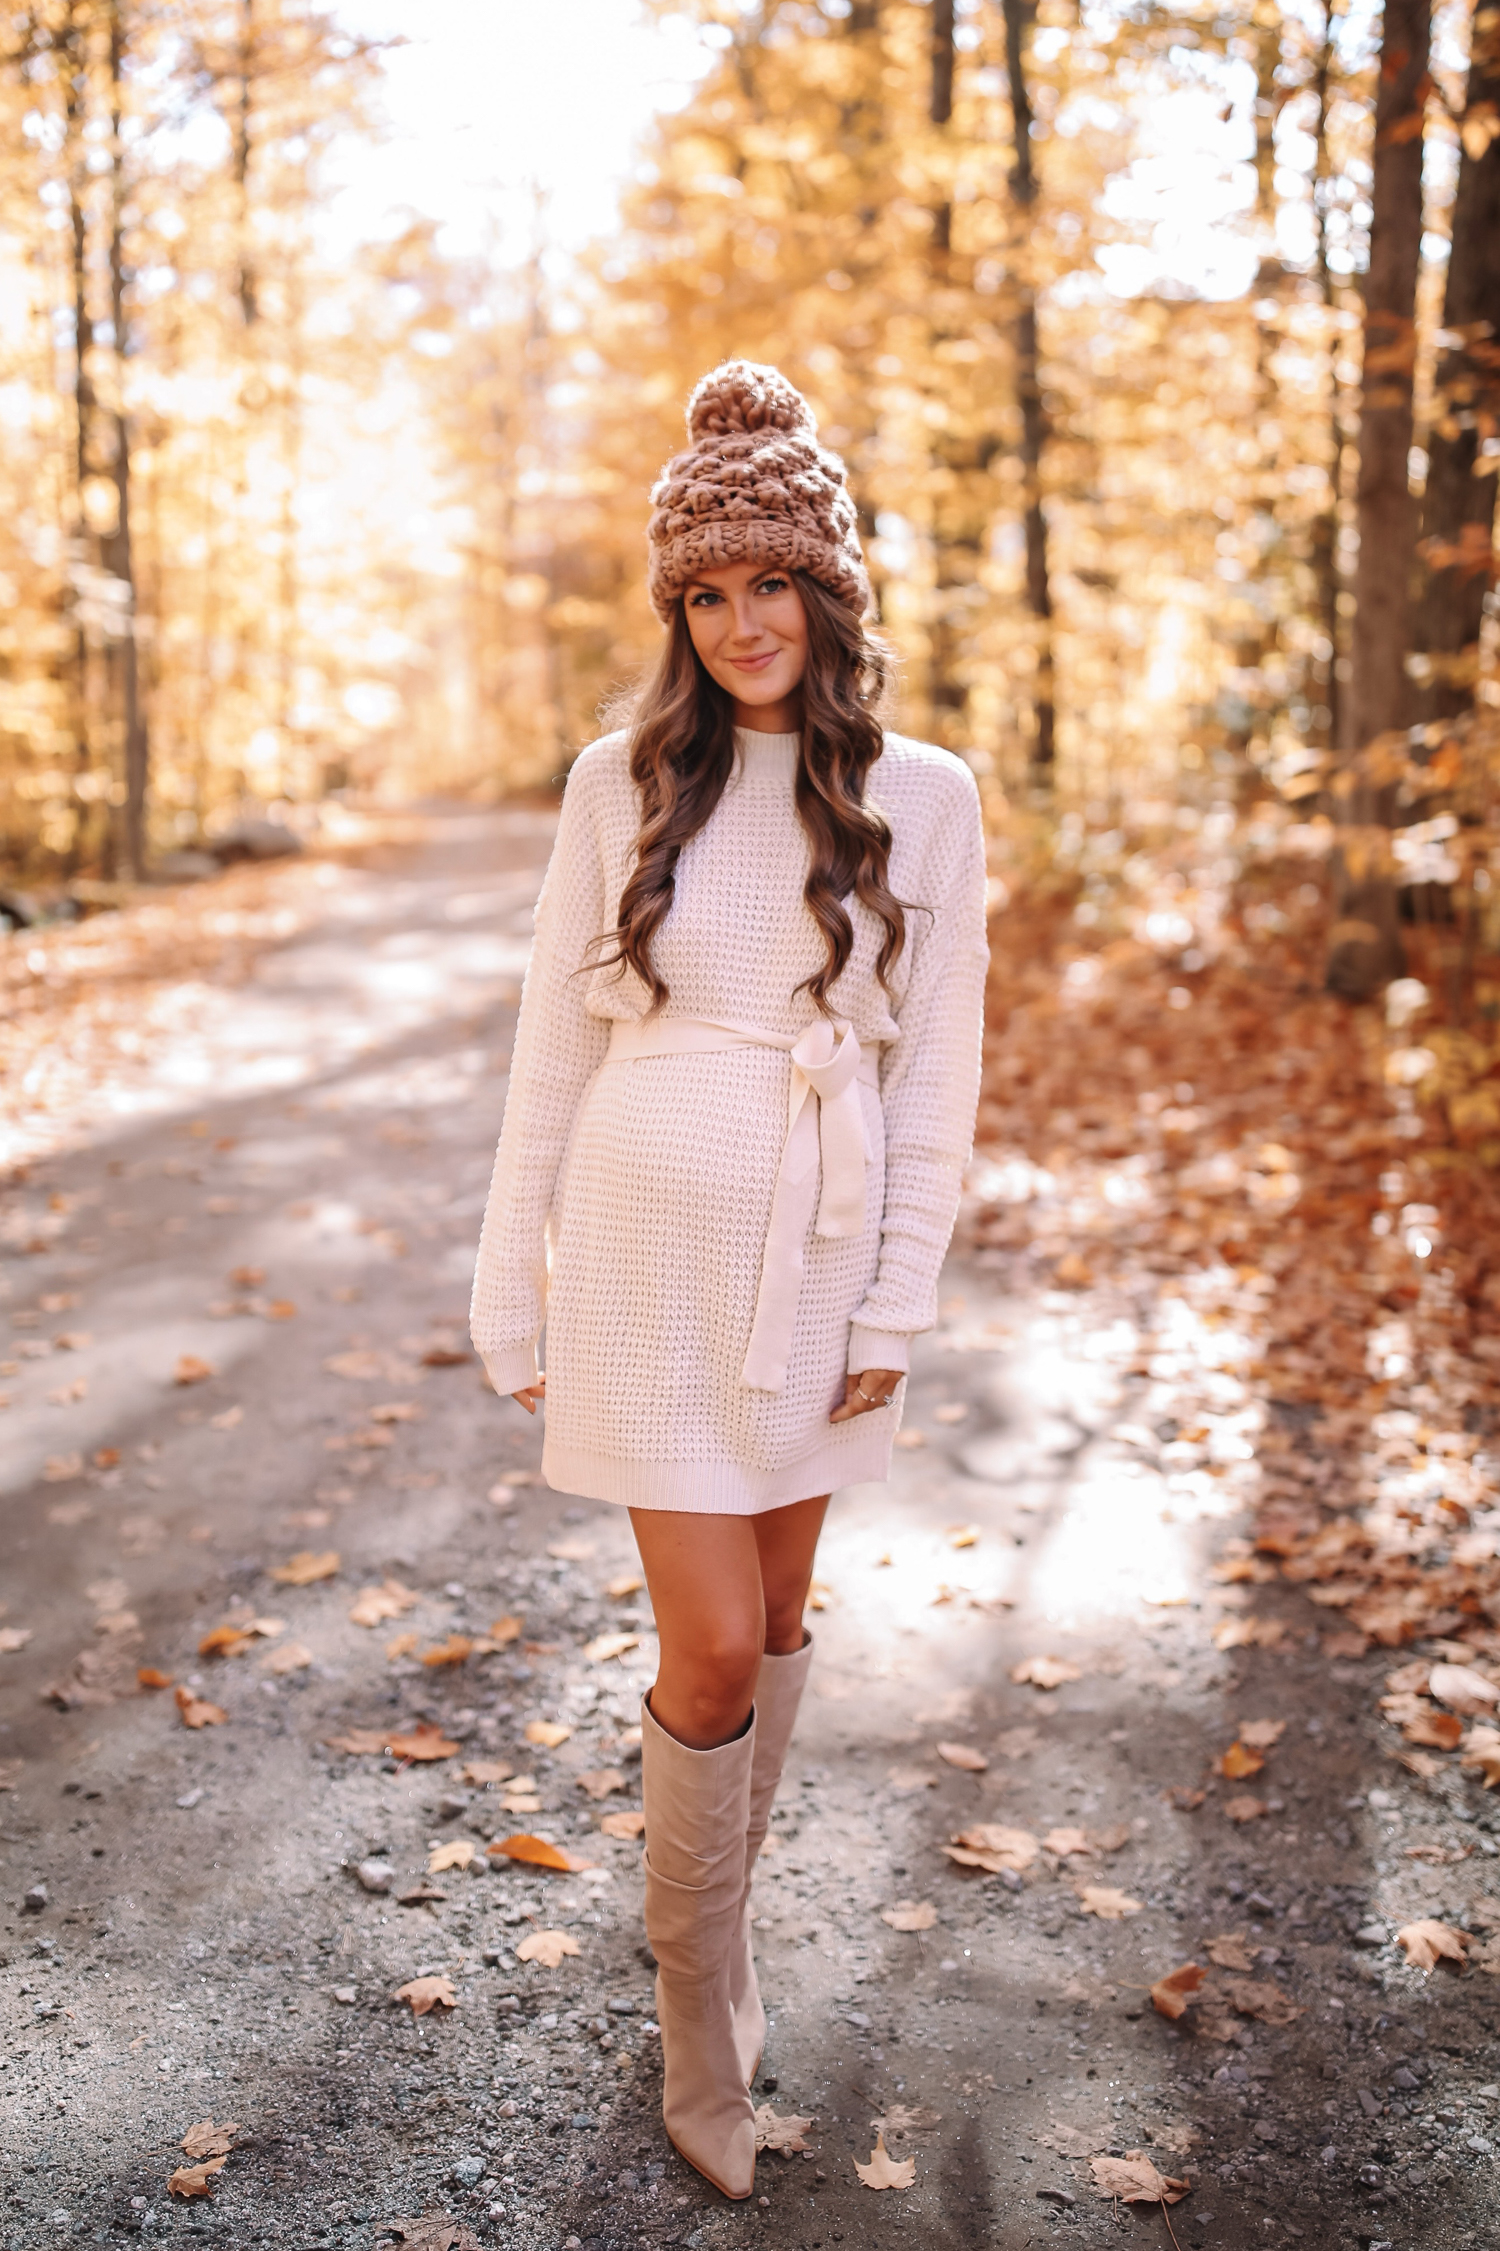 Cozy Sweater Dress + I Need Your Book Recs! - Southern Curls & Pearls